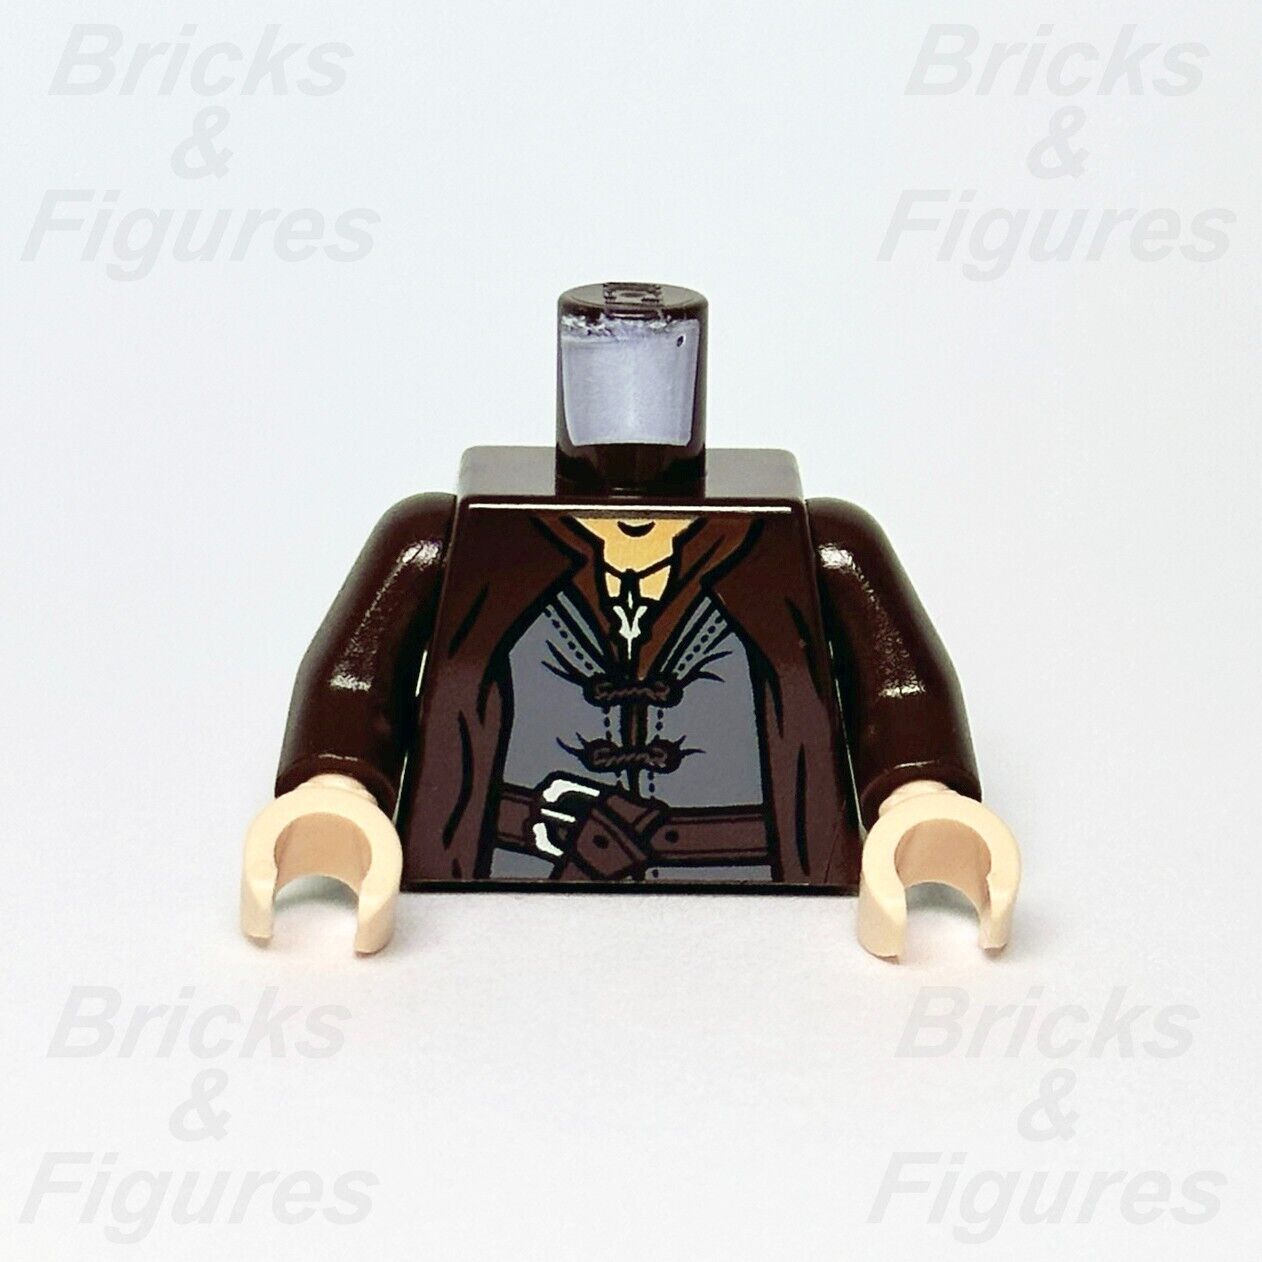 LEGO Aragorn Body Torso Minifigure Part The Hobbit & The Lord of the Rings 9472 - Bricks & Figures